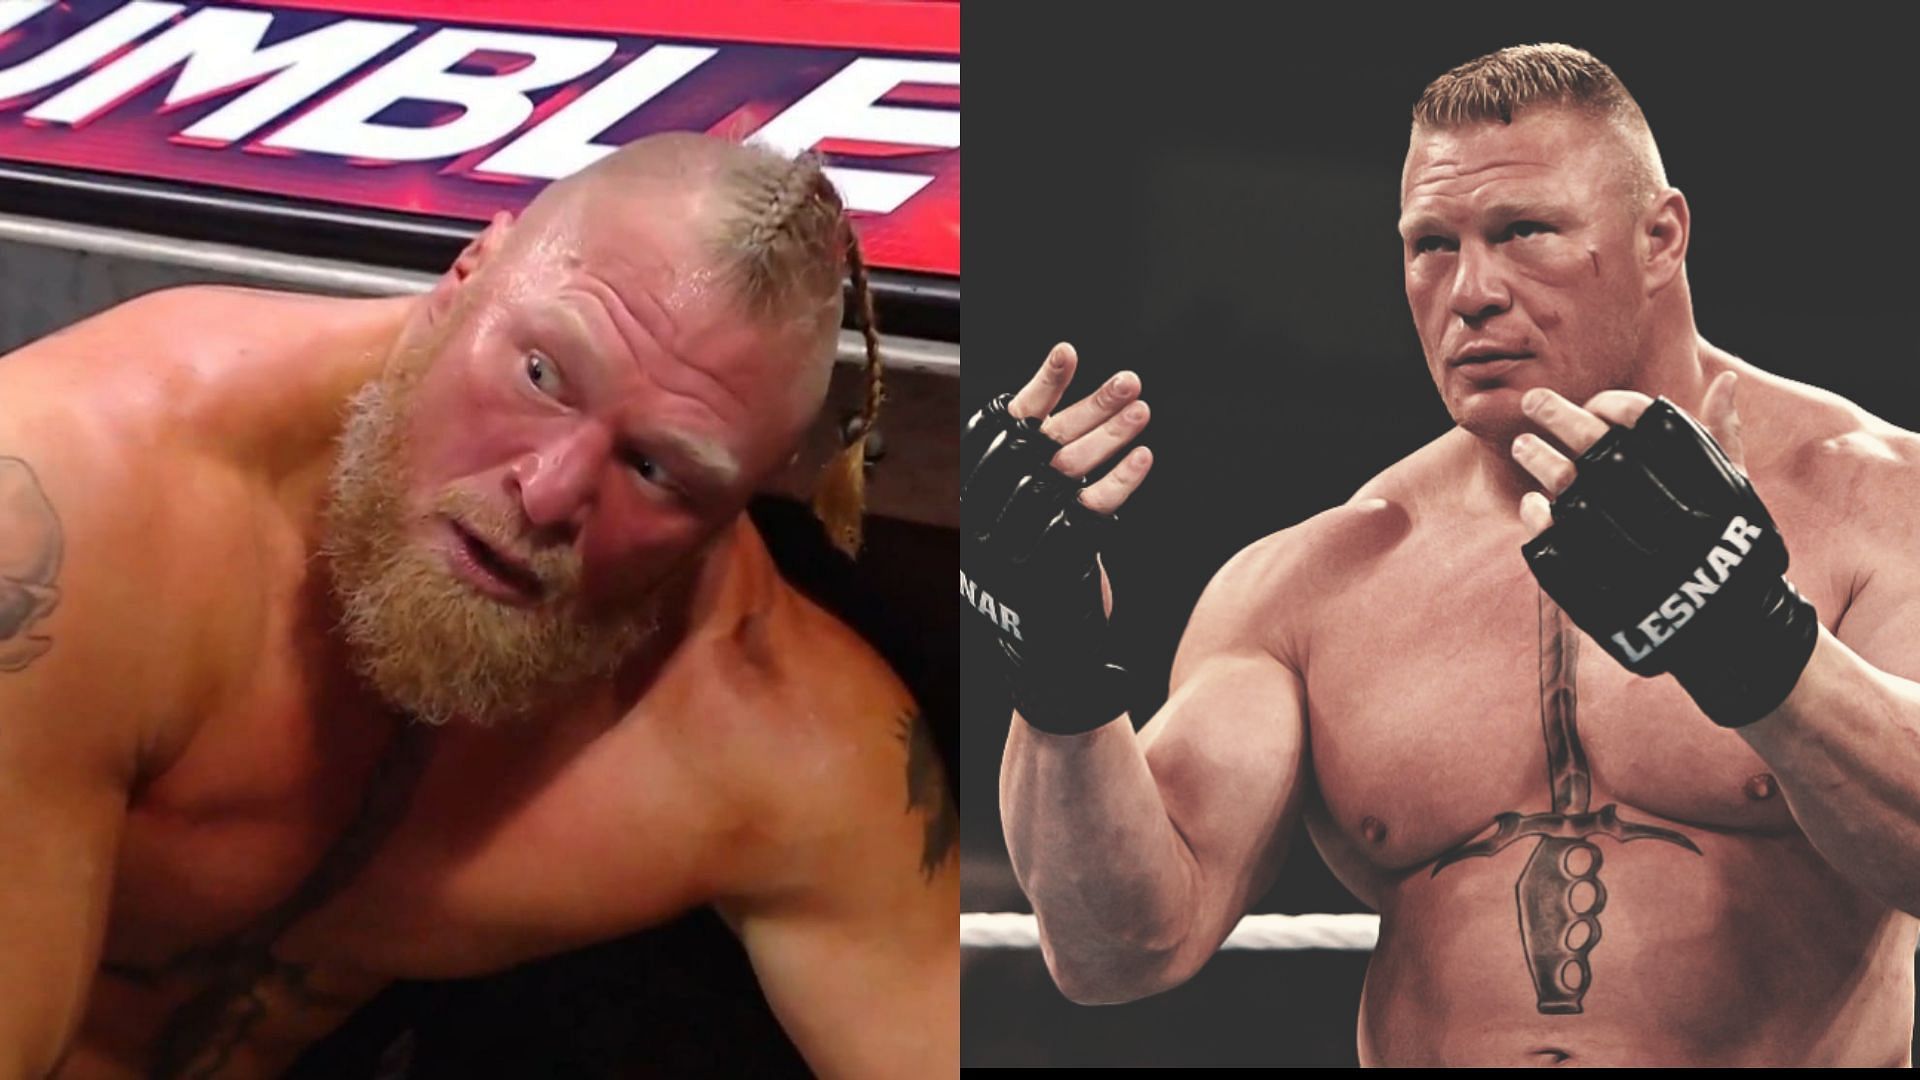 Brock Lesnar was not happy with the star